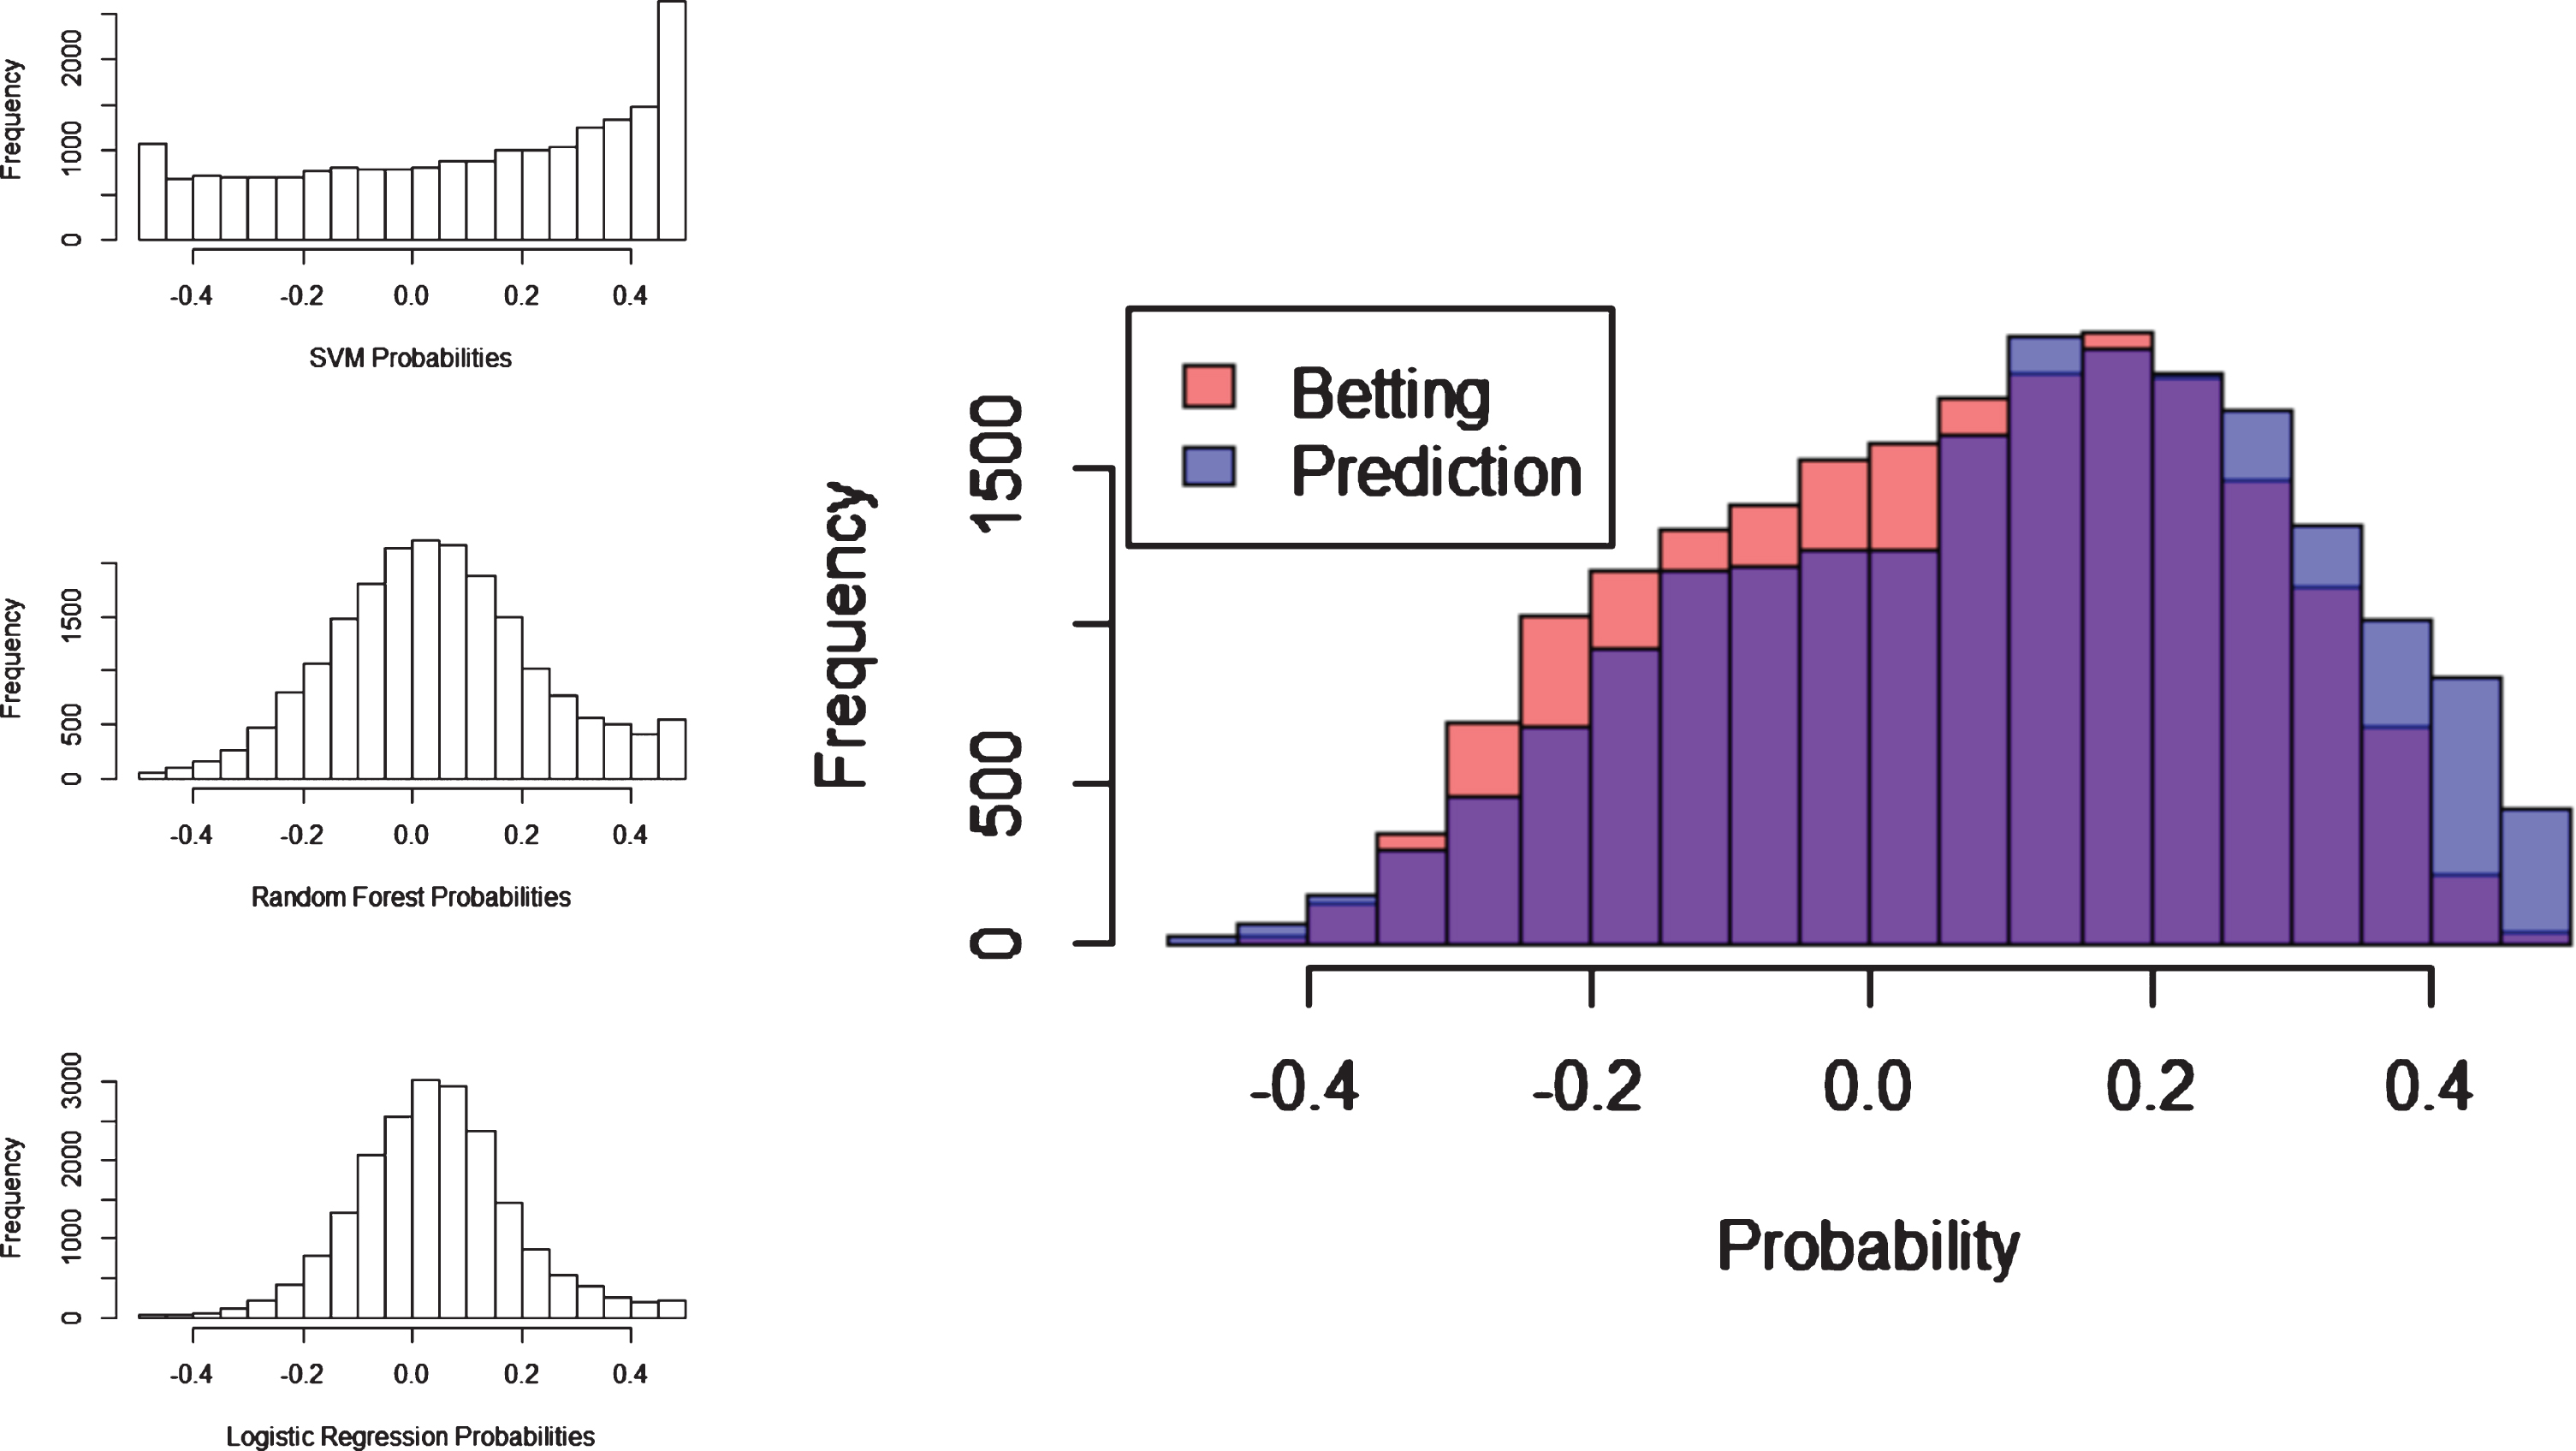 Score distribution for all models and average scores from all models alongside betting odds scores. High scores indicate high-confidence correct predictions and low scores indicate high-confidence incorrect predictions. Scores near zero are low-confidence predictions, with positive values indicating correct predictions and negative scores indicating incorrect predictions. All distributions are shifted to the right (indicating more correct predictions than incorrect predictions).